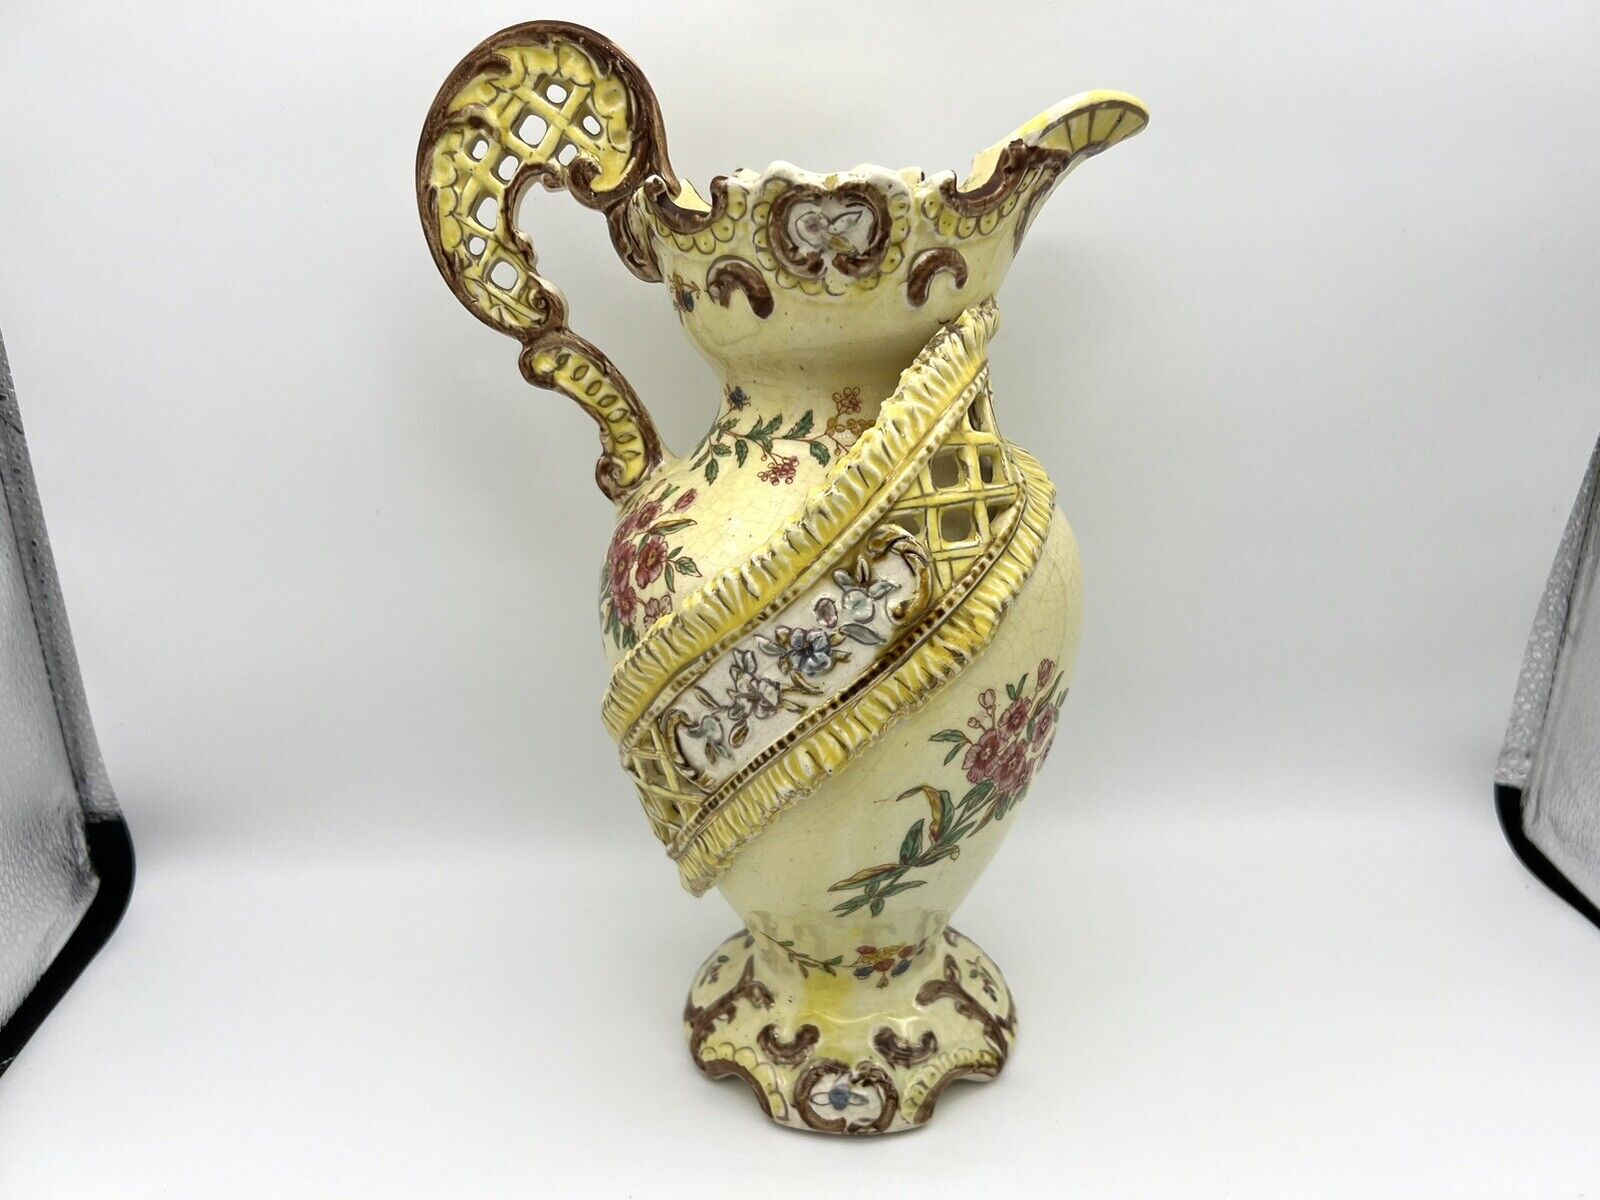 Antique Fancy Empire Porcelain Company Tall Ribbon Pitcher Distressed Condition